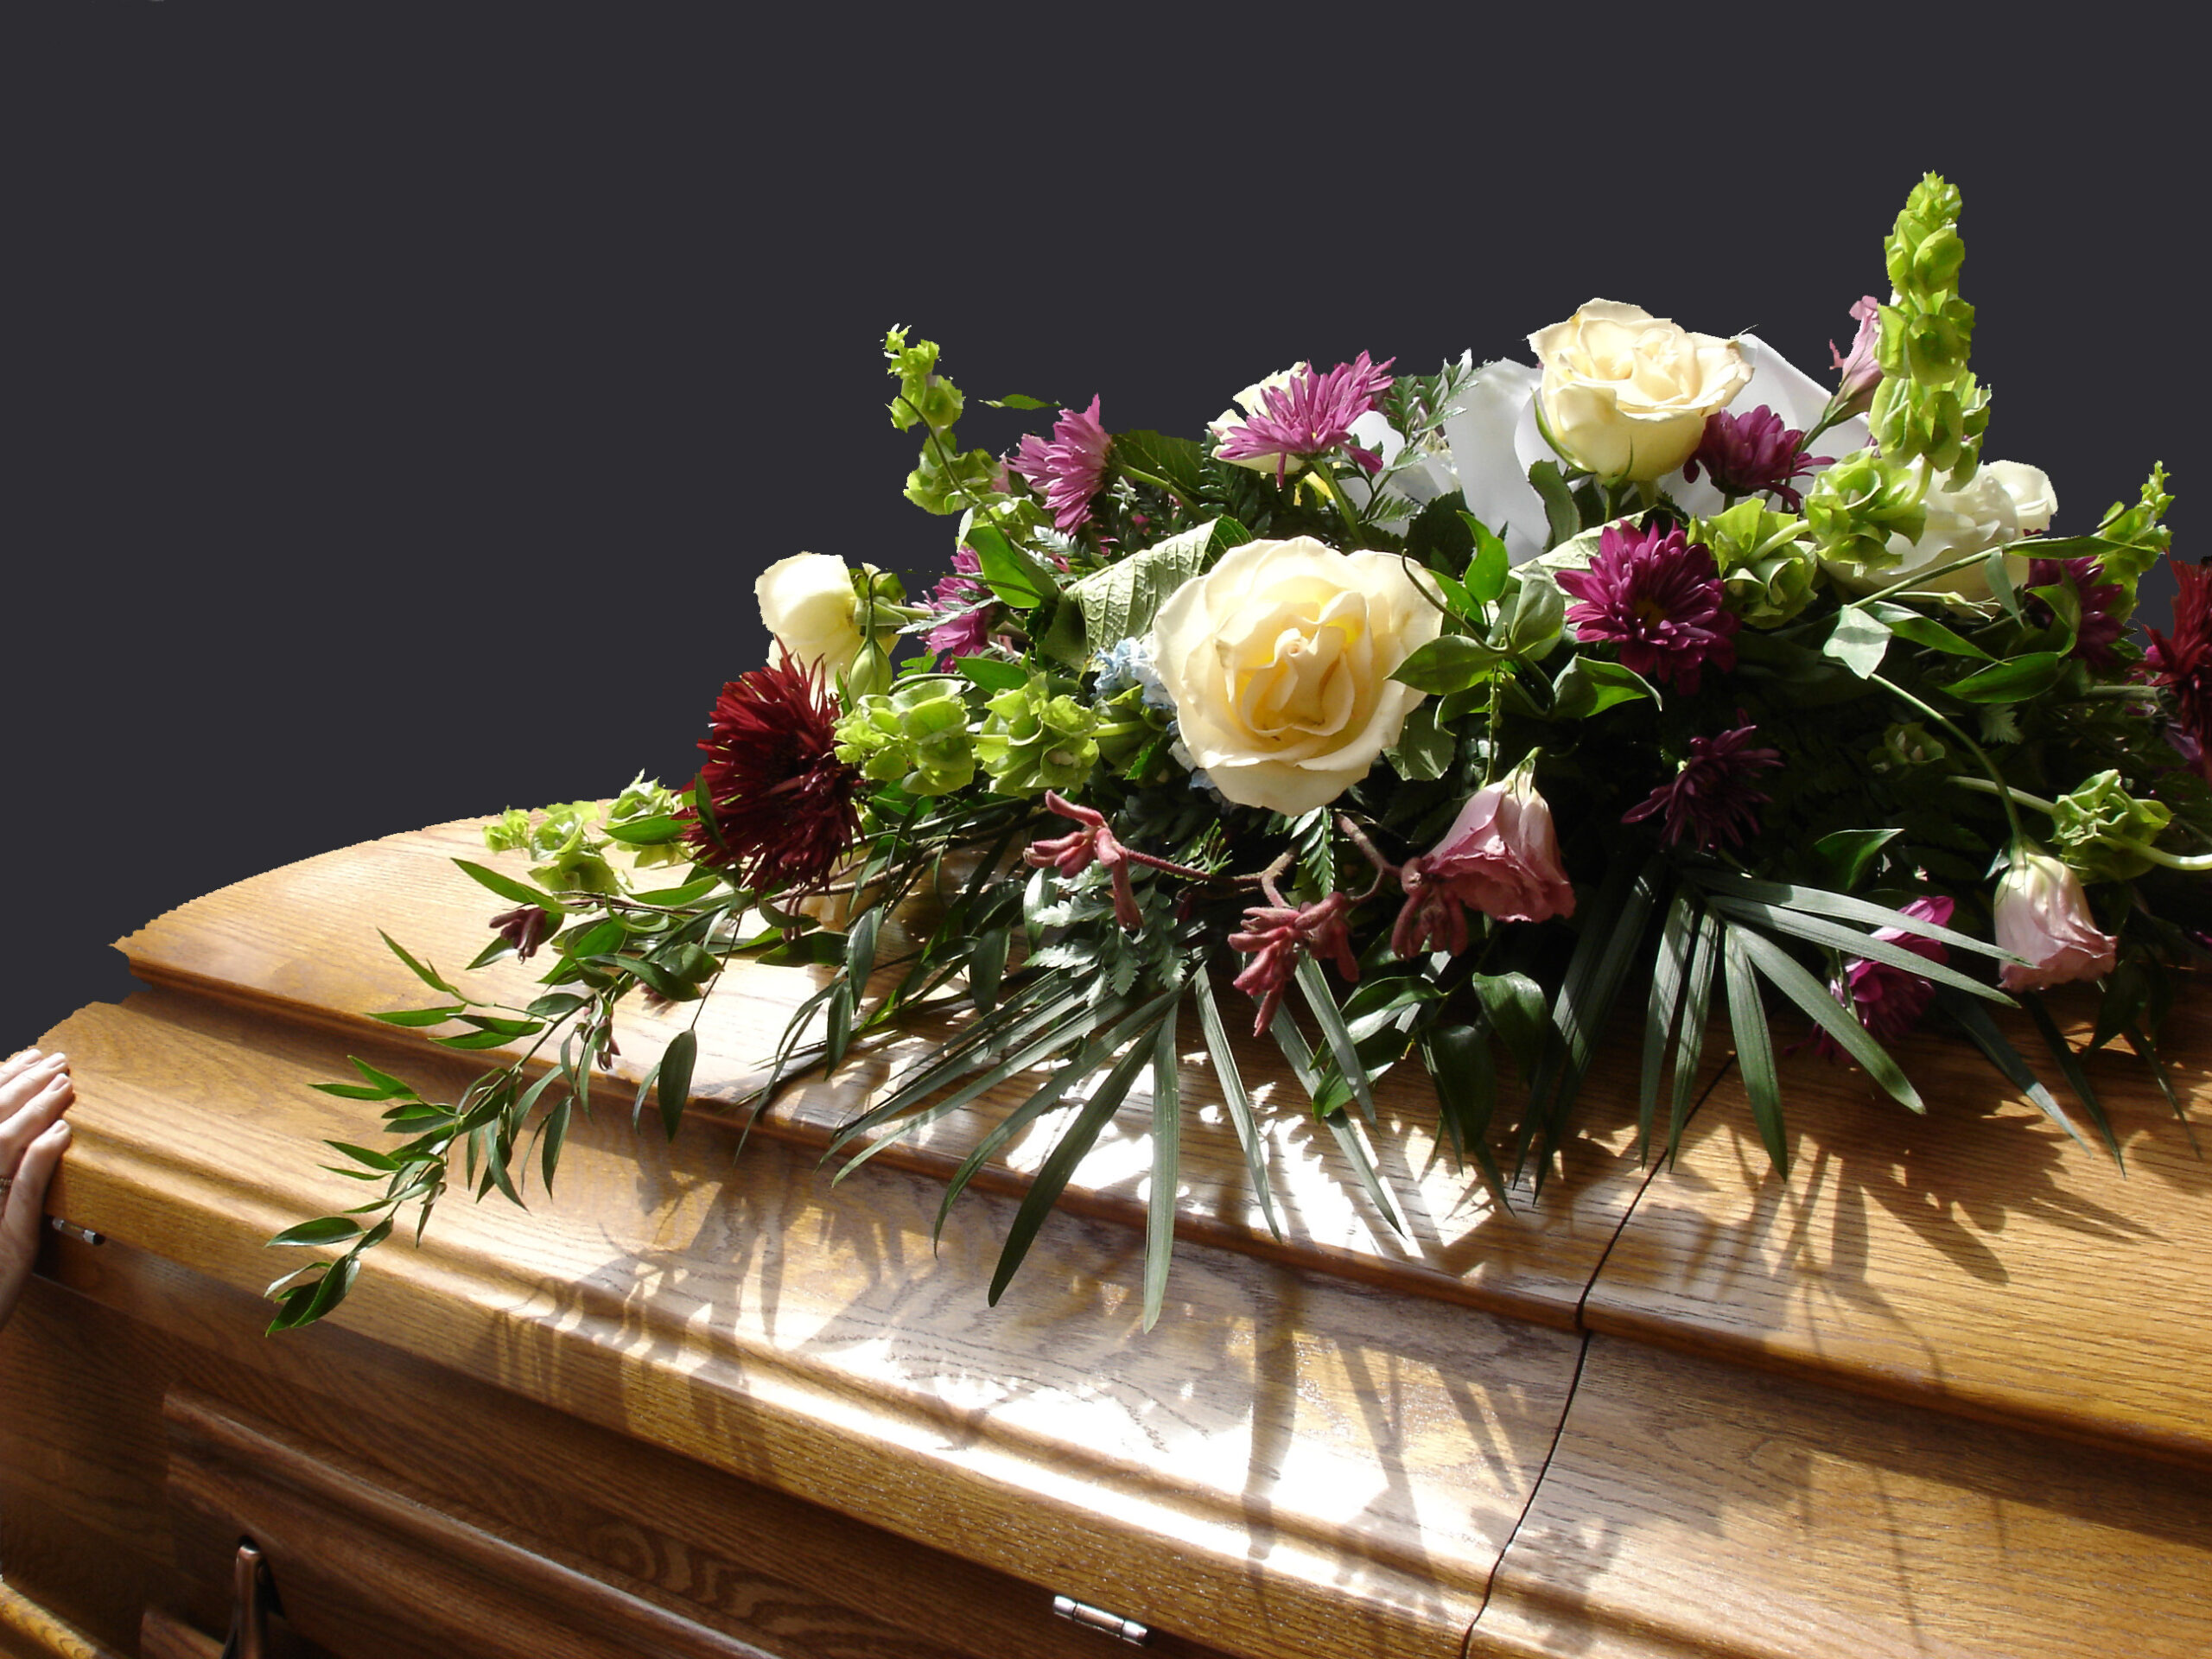 Sending Sympathy Flowers - What You Need To Know